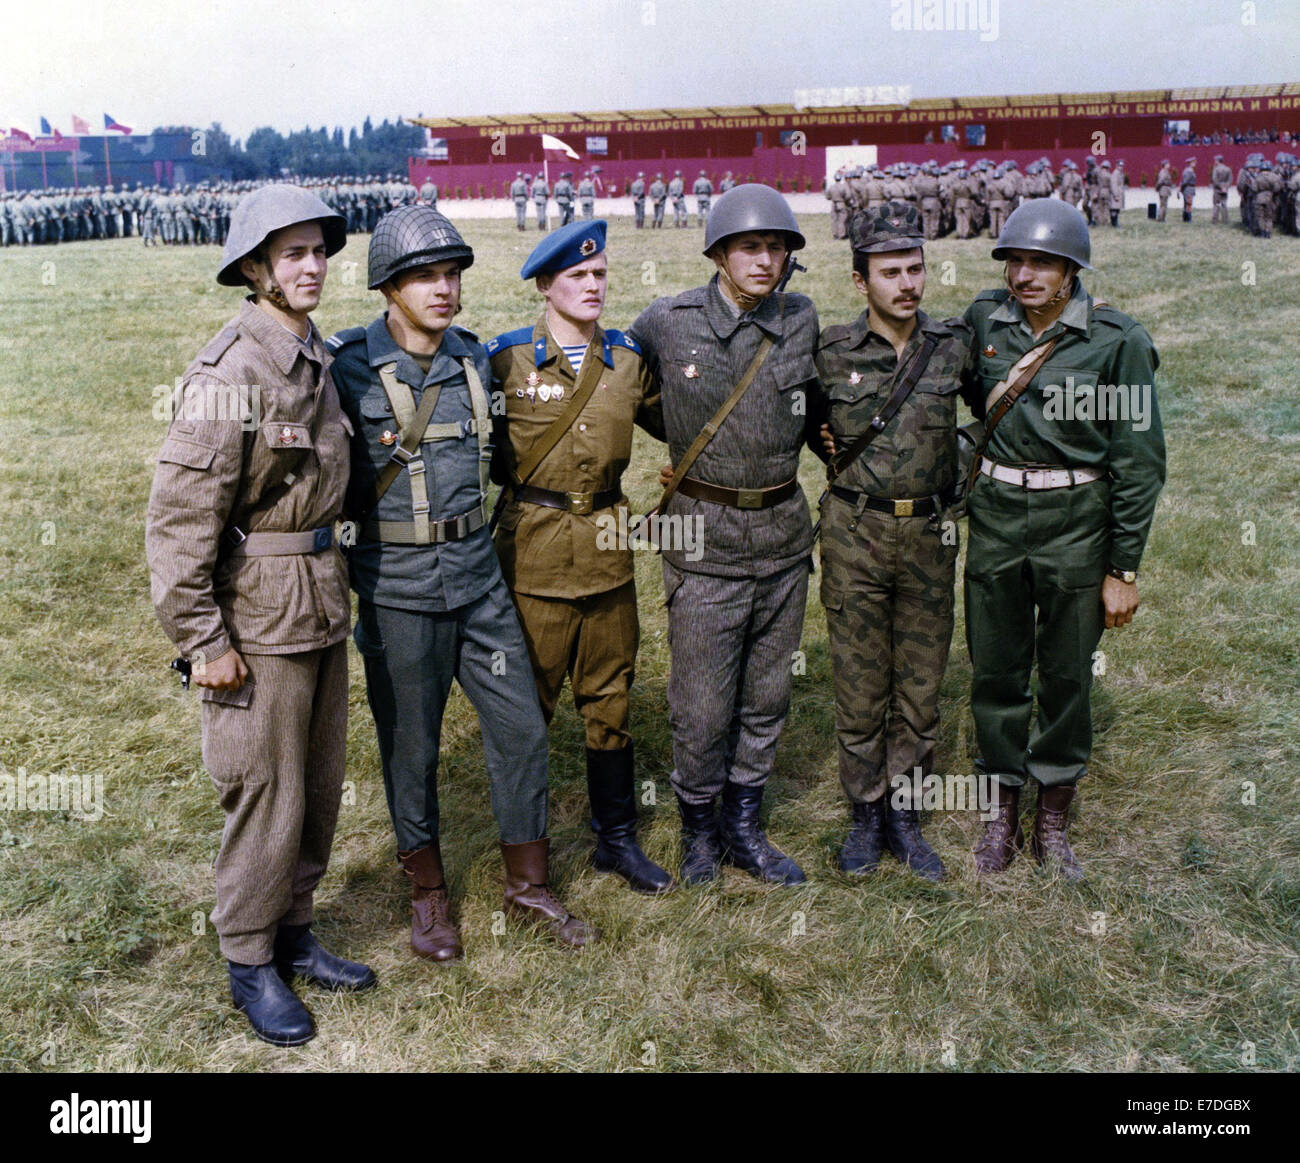 soldiers-from-the-various-armed-forces-of-the-warsaw-pact-countries-E7DGBX.jpg